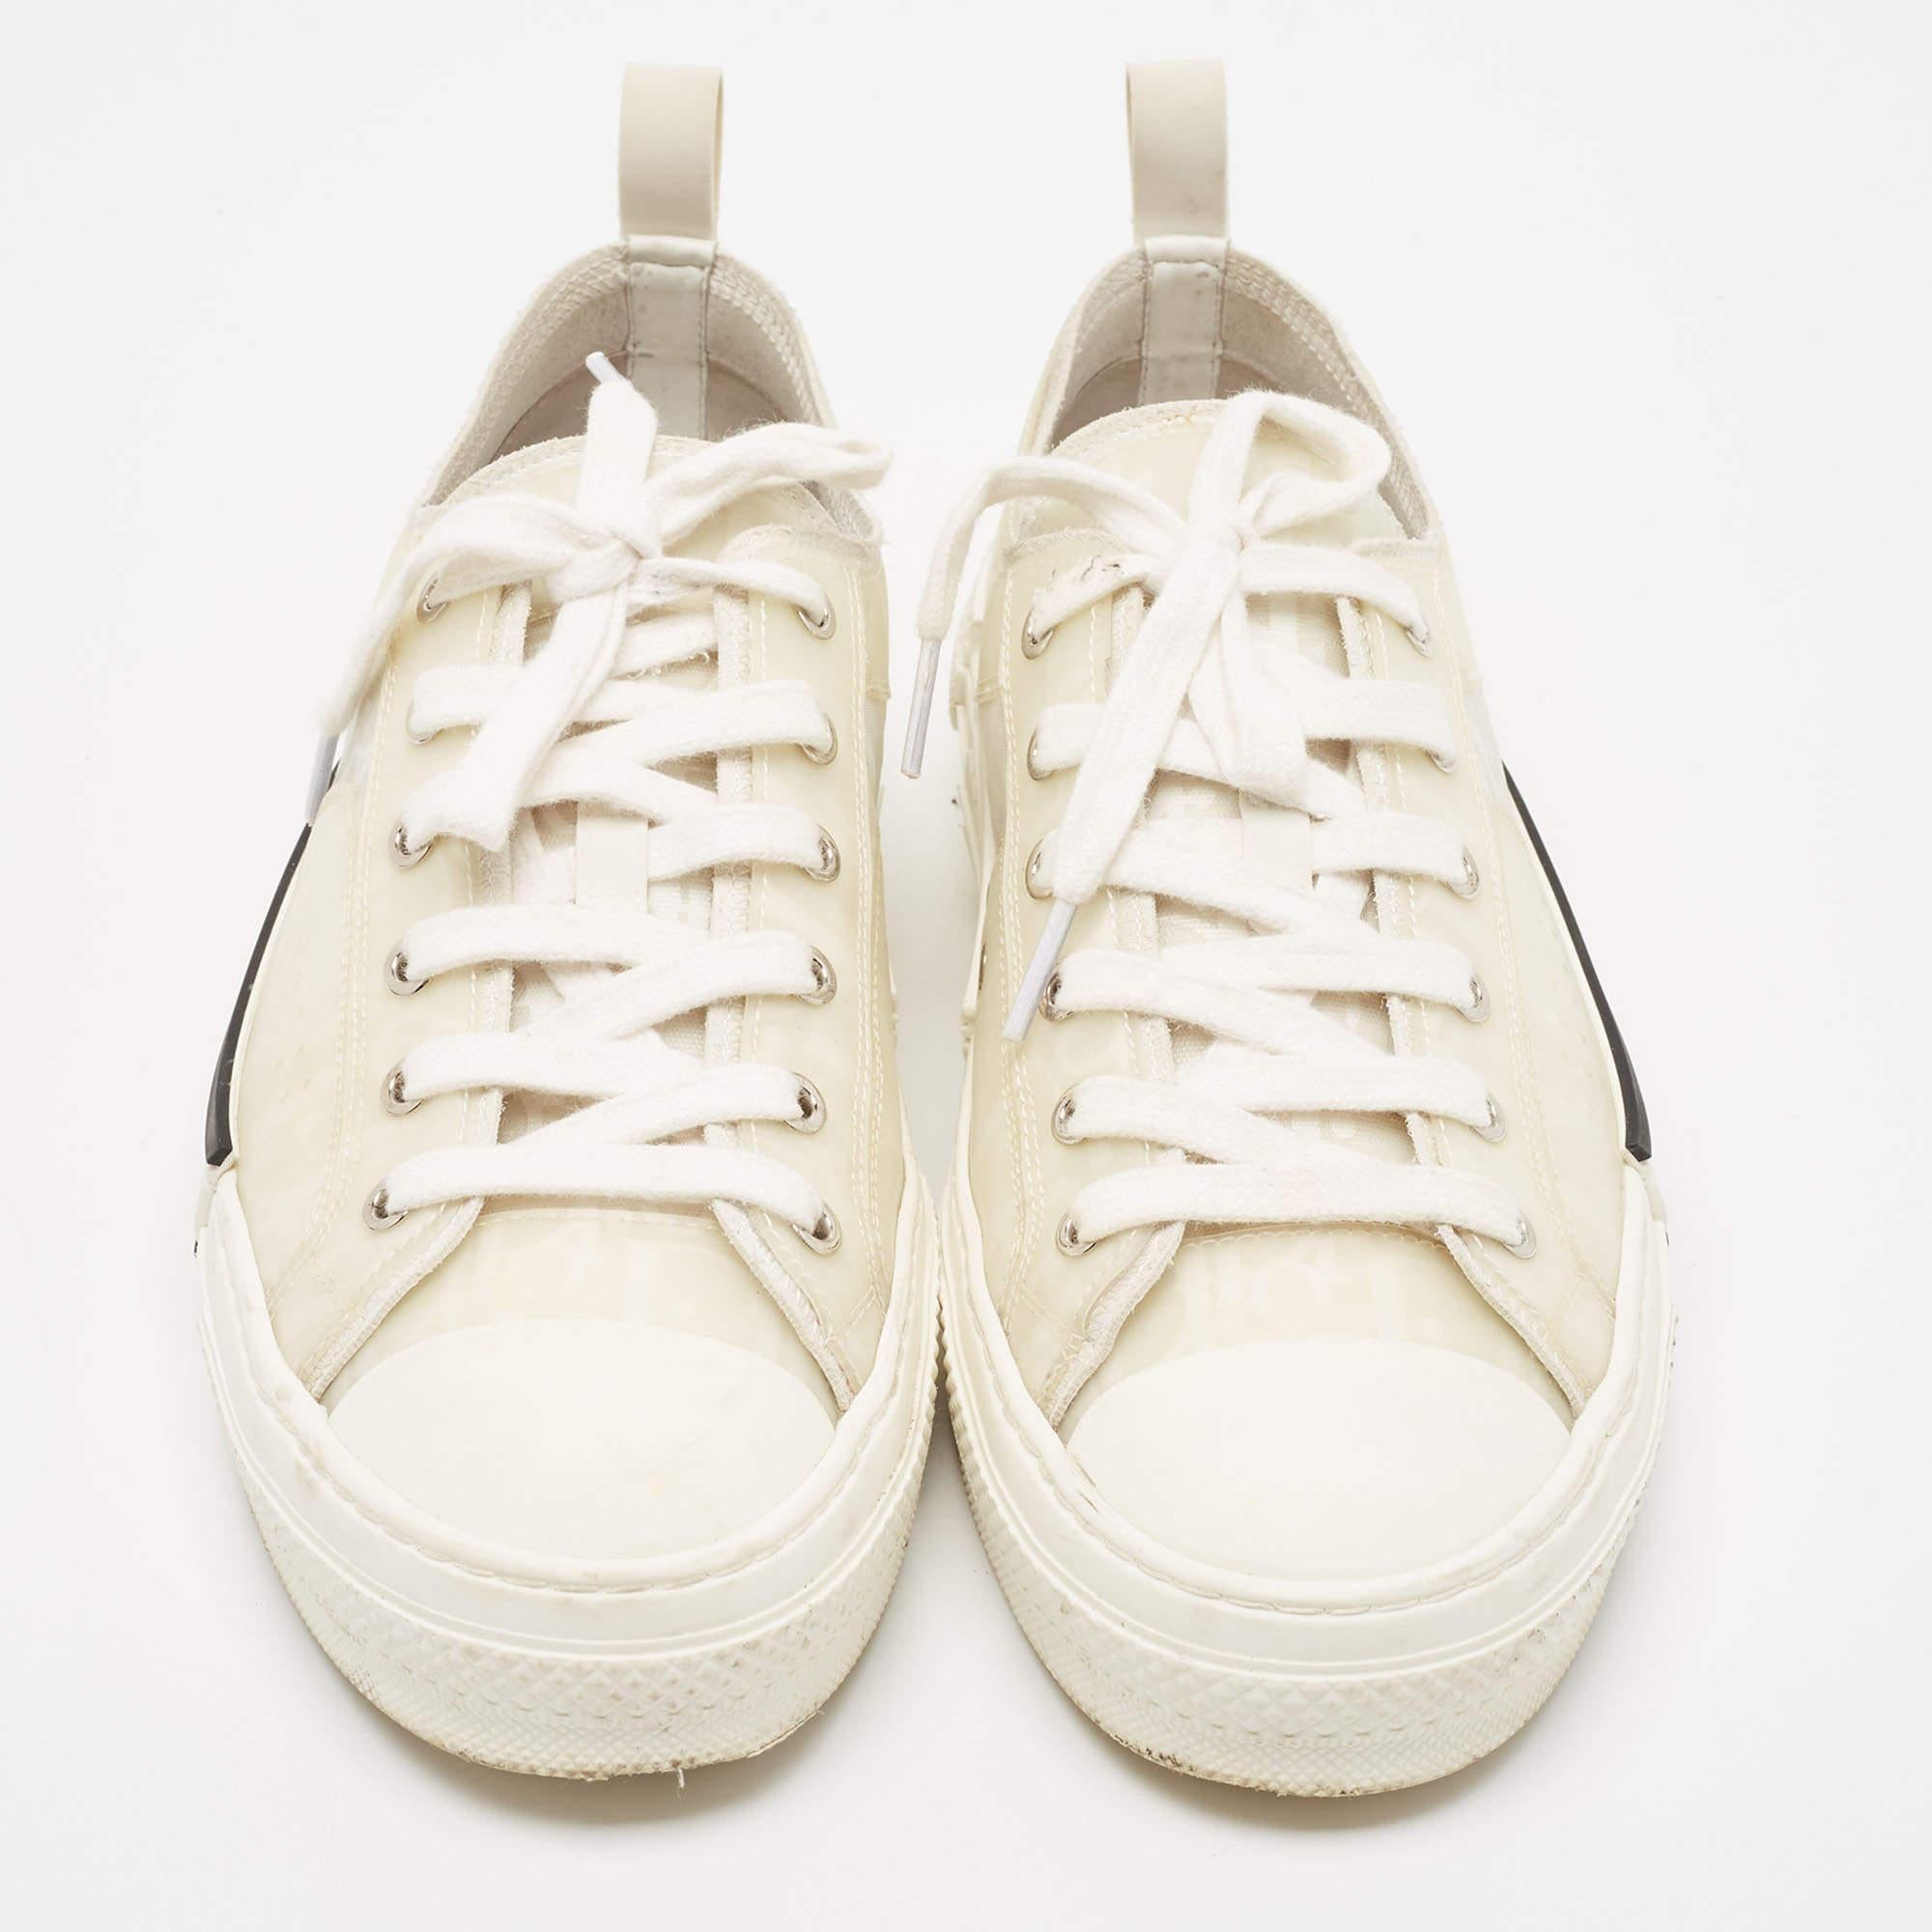 Upgrade your style with these Dior B23 sneakers. Meticulously designed for fashion and comfort, they're the ideal choice for a trendy and comfortable stride.

